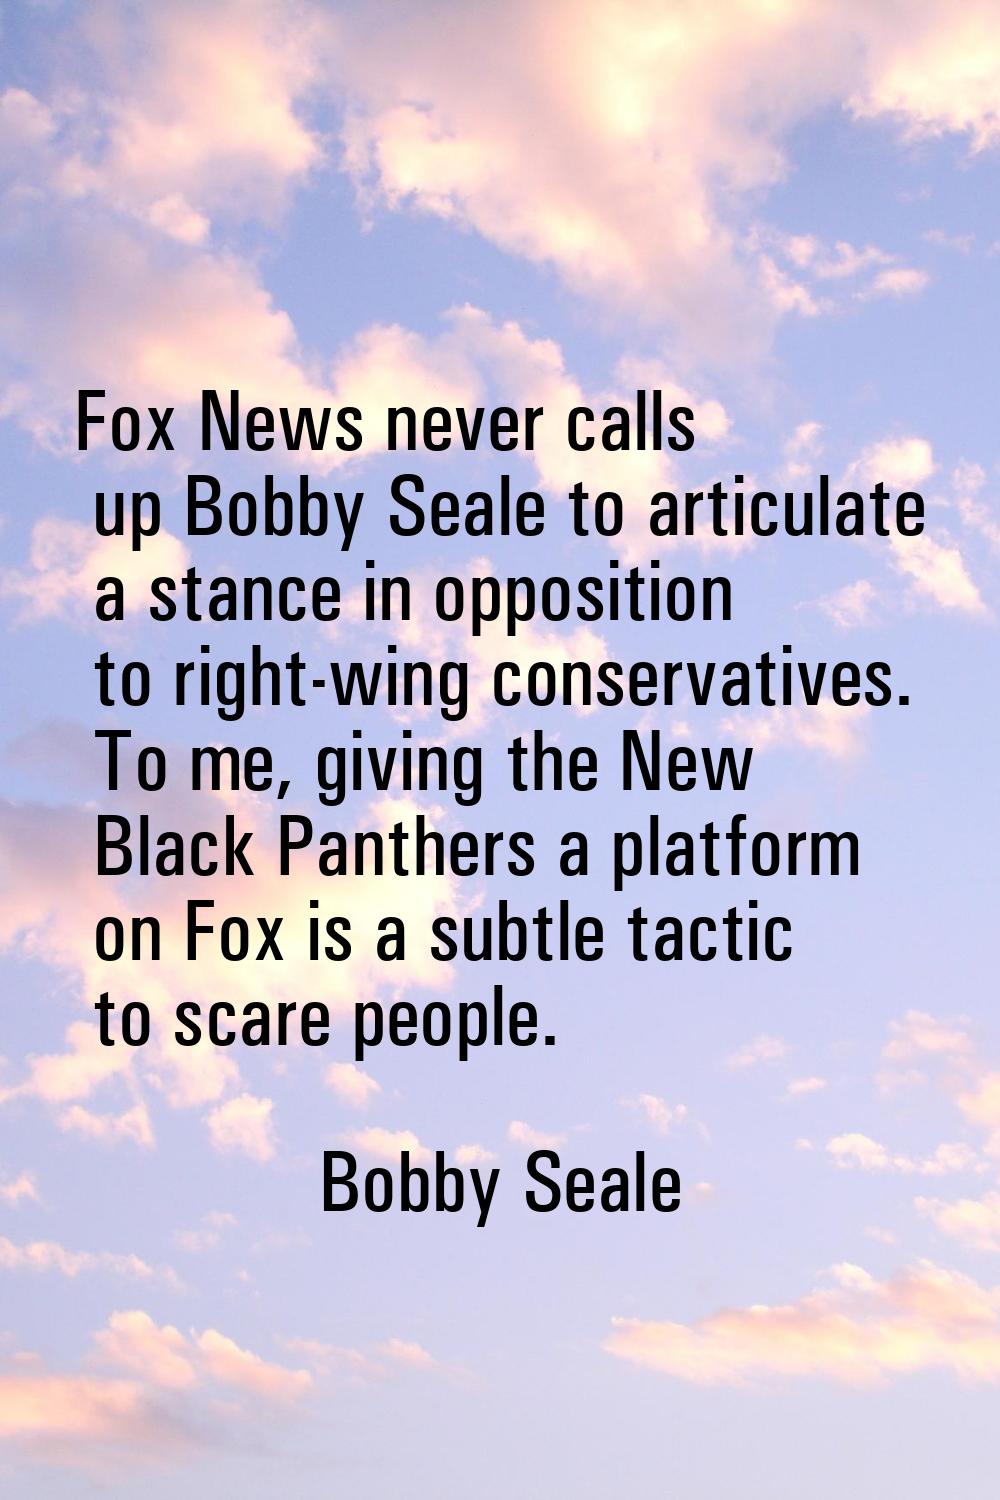 Fox News never calls up Bobby Seale to articulate a stance in opposition to right-wing conservative